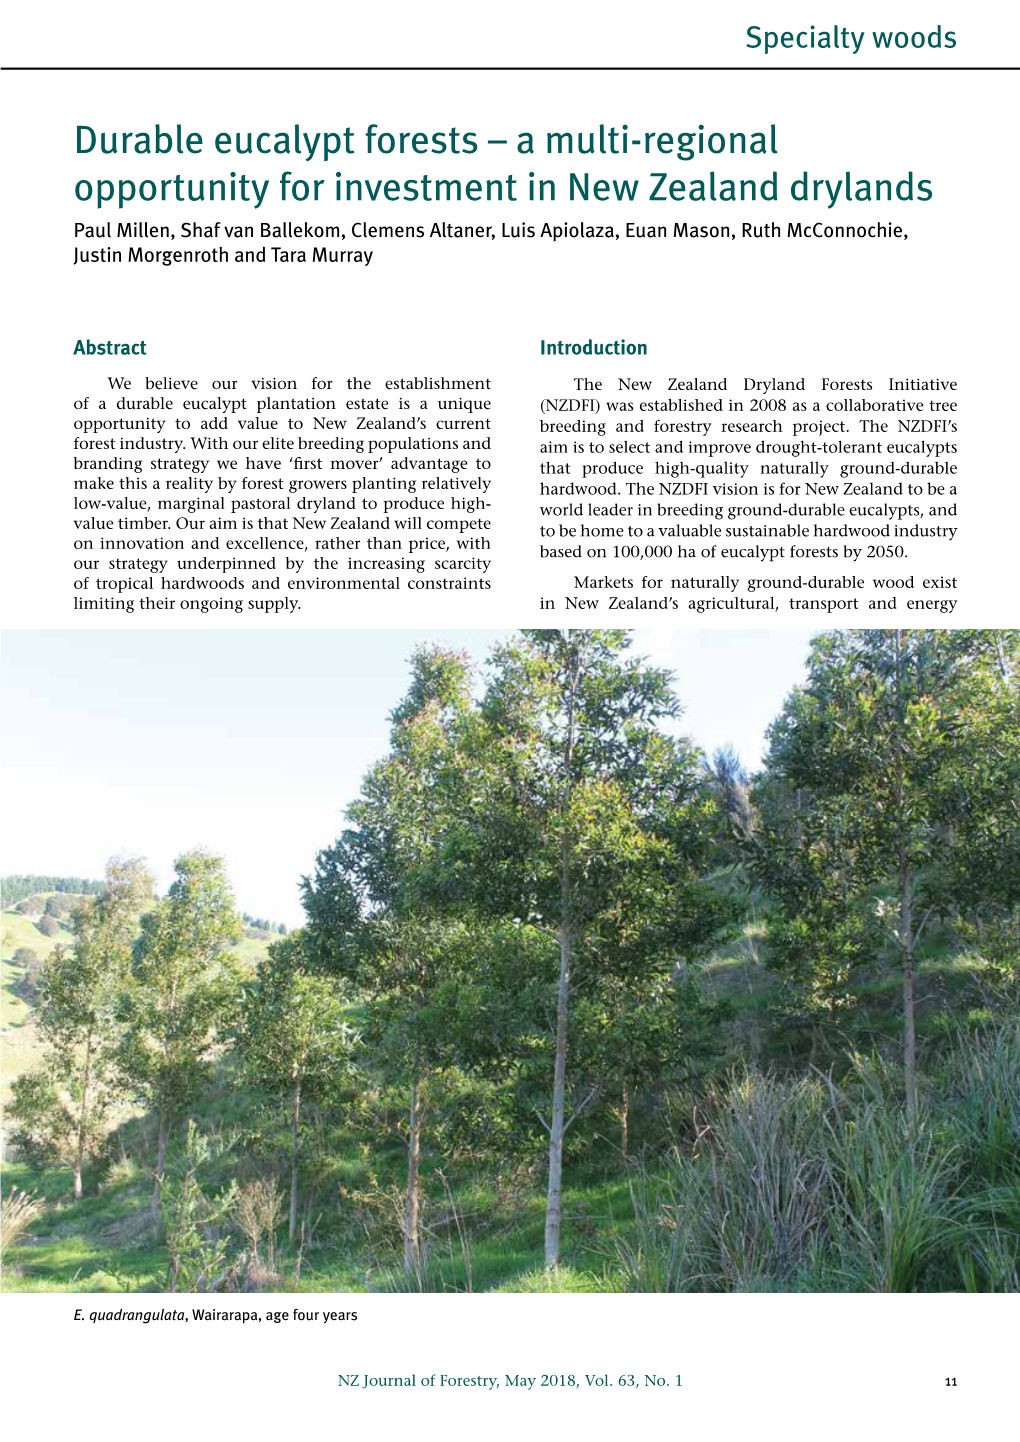 Durable Eucalypt Forests – a Multi-Regional Opportunity For